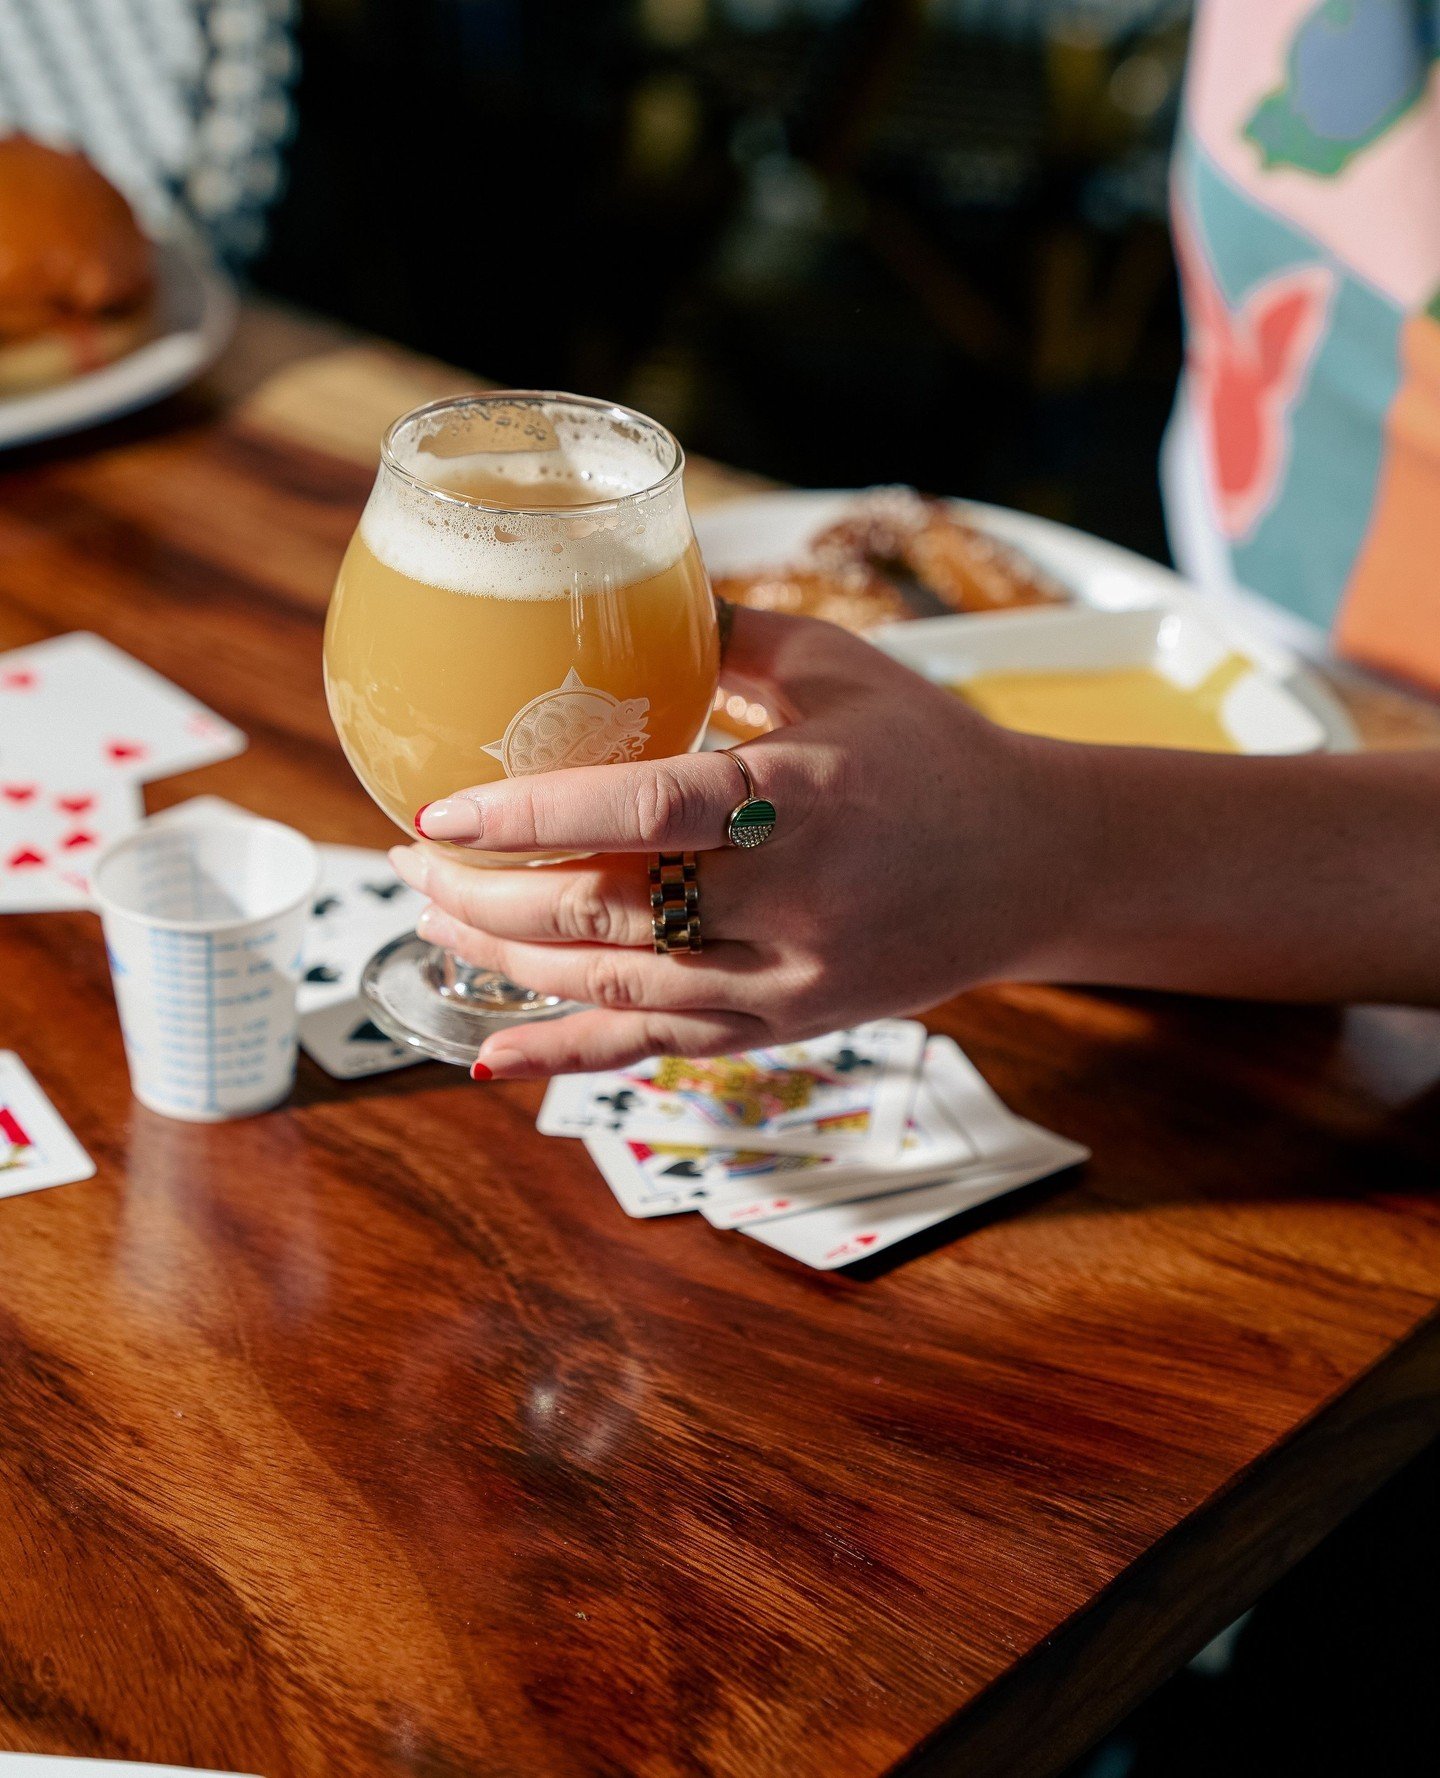 🎉 Join us tonight at 7pm for TRIVIA Night at The Albert! 🧠 Test your brainpower while sipping your favorite drinks. Gather your friends and let the games begin! 🍻 ⁠
.⁠
.⁠
.⁠
 #trivianight #theablert #bestneighborhoodbar #atlanta #thingstodinatlant